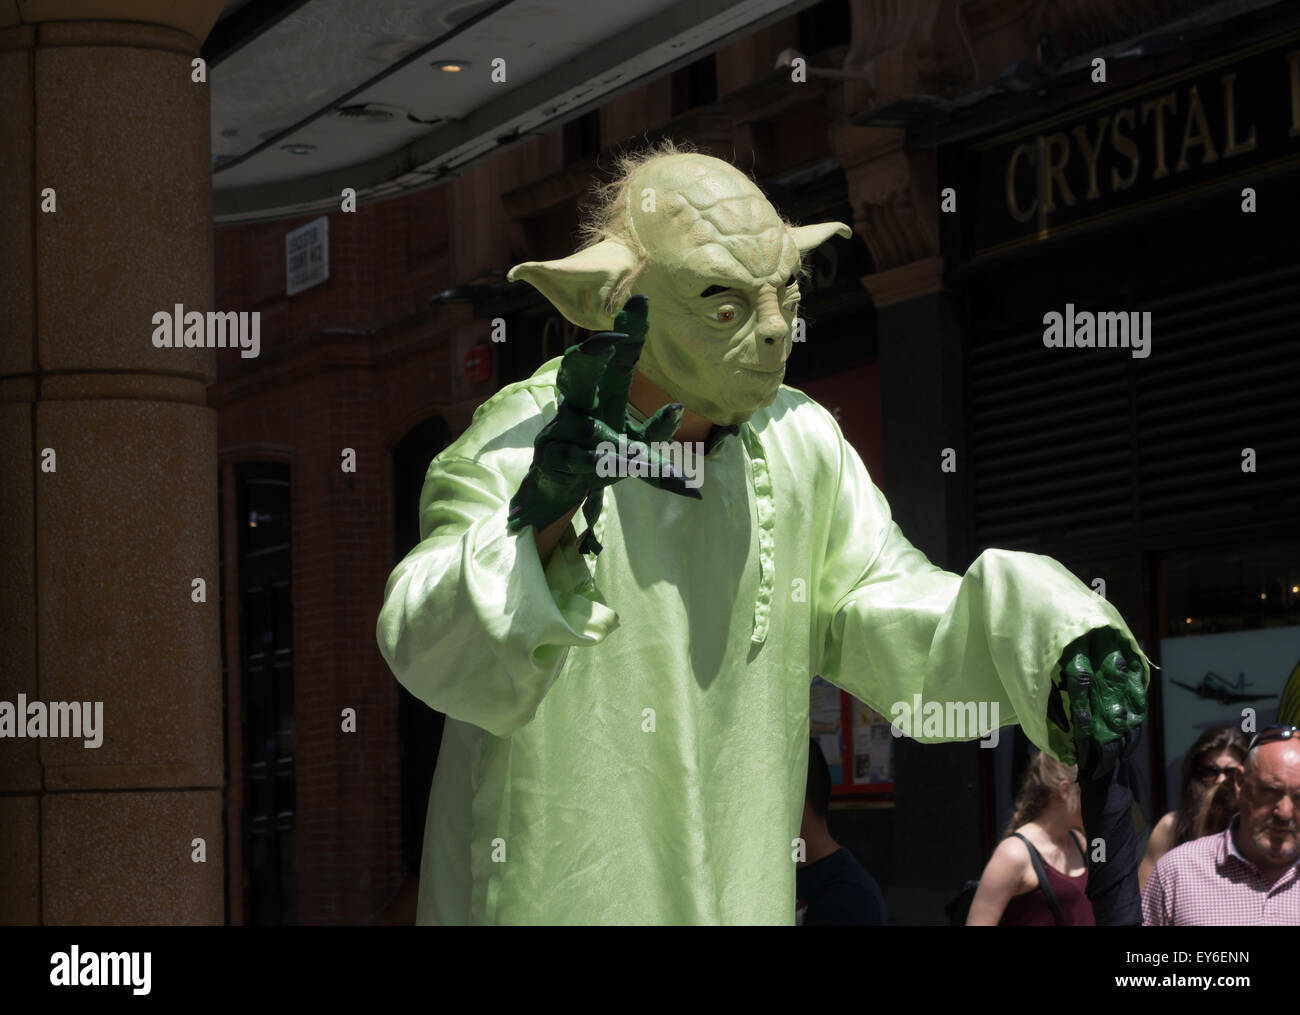 A street entertainer dressed as the character Yoda from Star Wars, Leicester Square, London UK Stock Photo